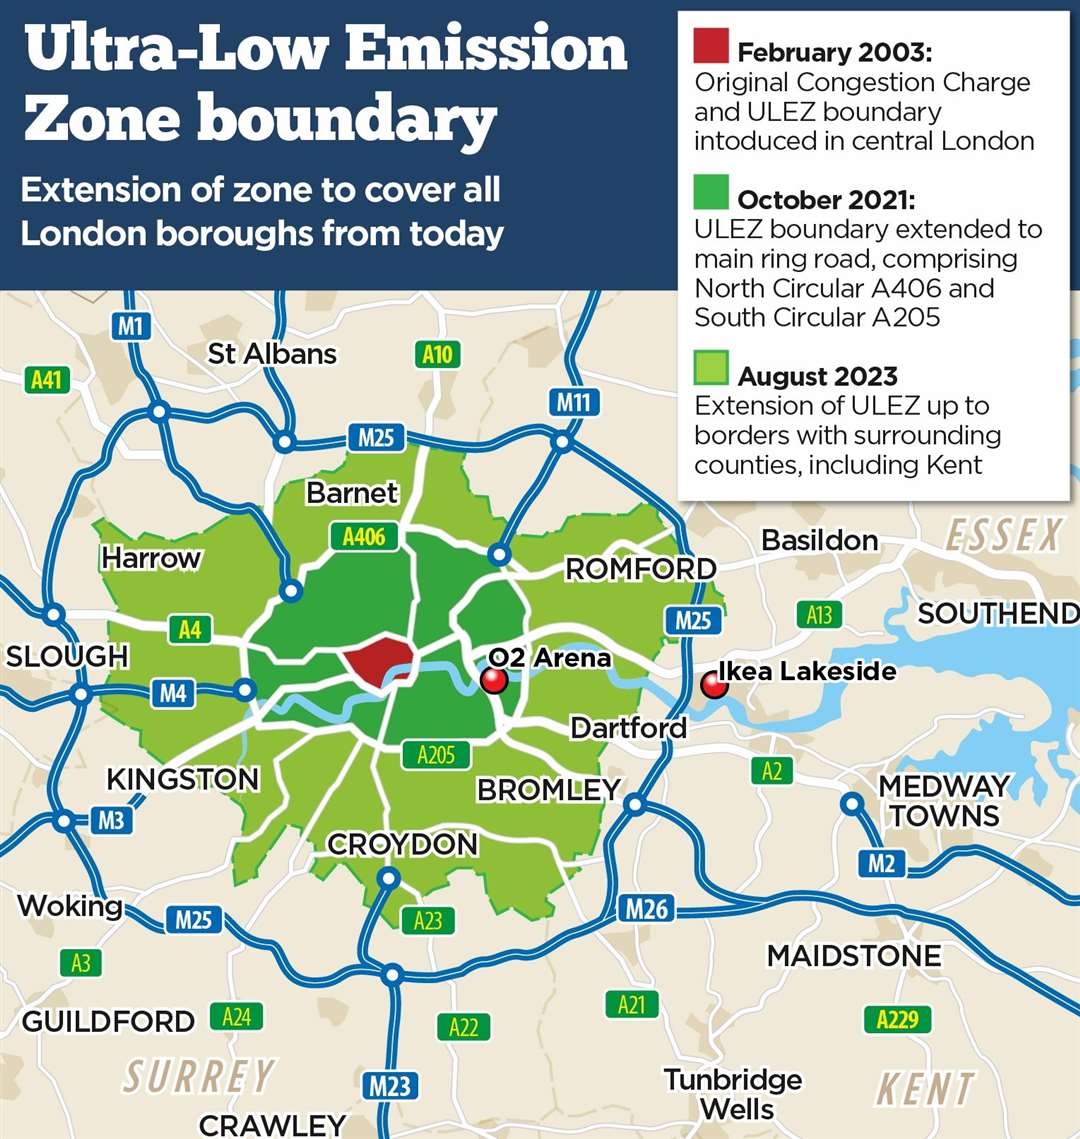 The ULEZ boundary now covers all London boroughs, as of August 29